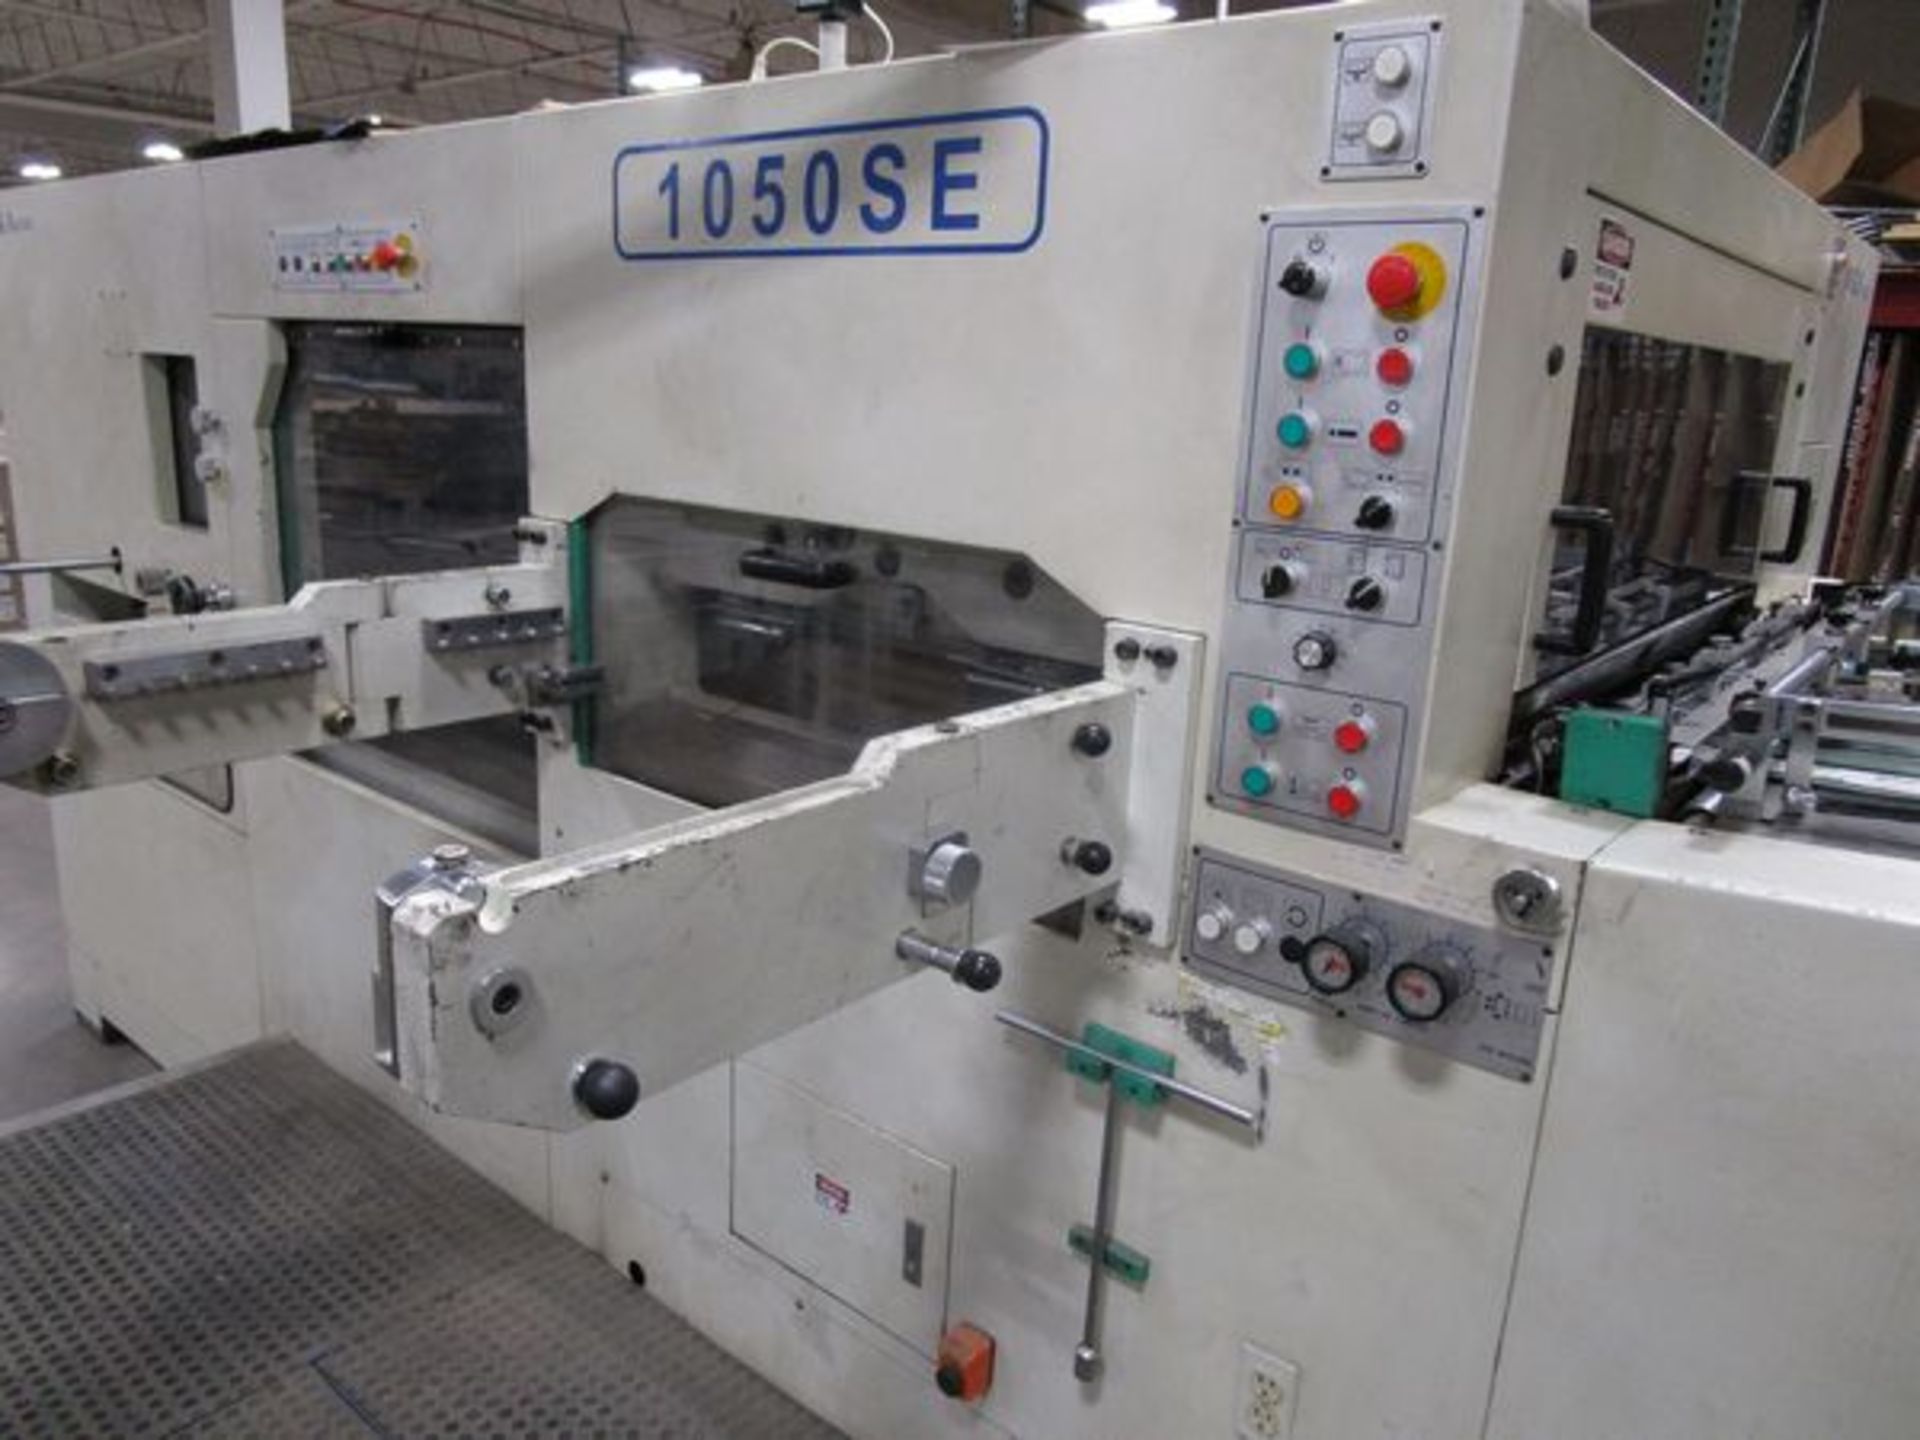 2007 Brausse Model 1050-SE Automatic Platen Die Cutter, s/n JZ-22148, 1050mm x 750mm Max Cutting - Image 13 of 16